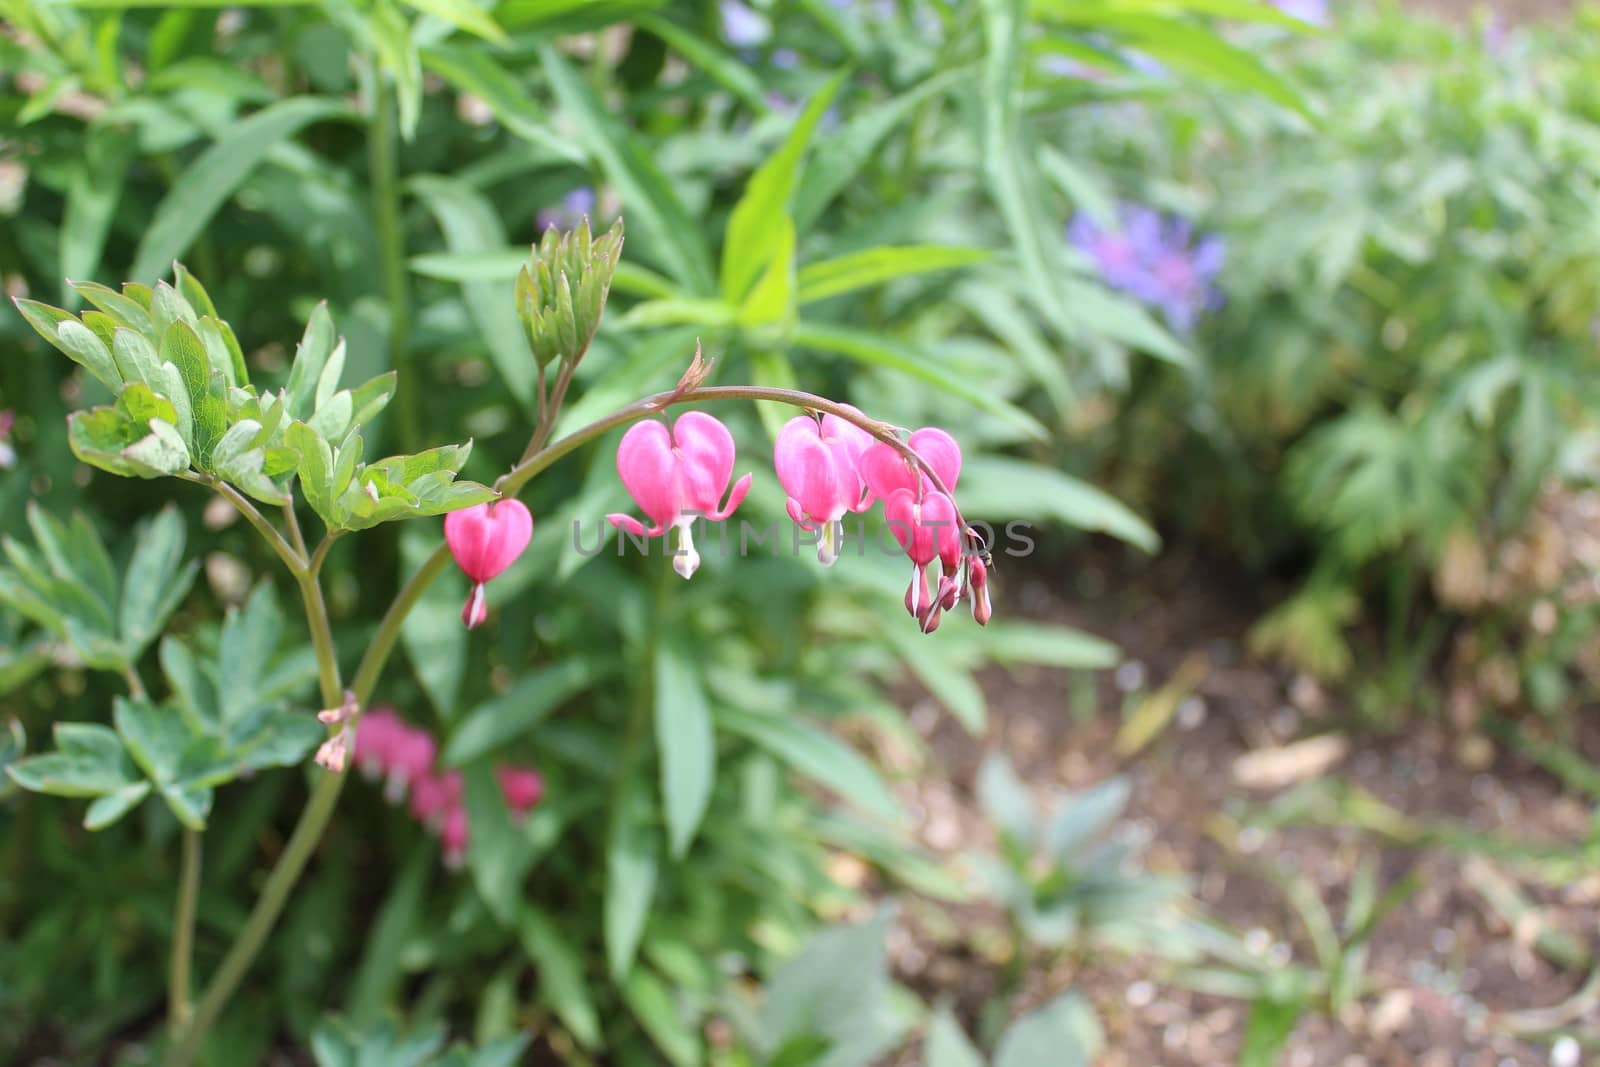 The picture shows a bleeding heart in the garden.